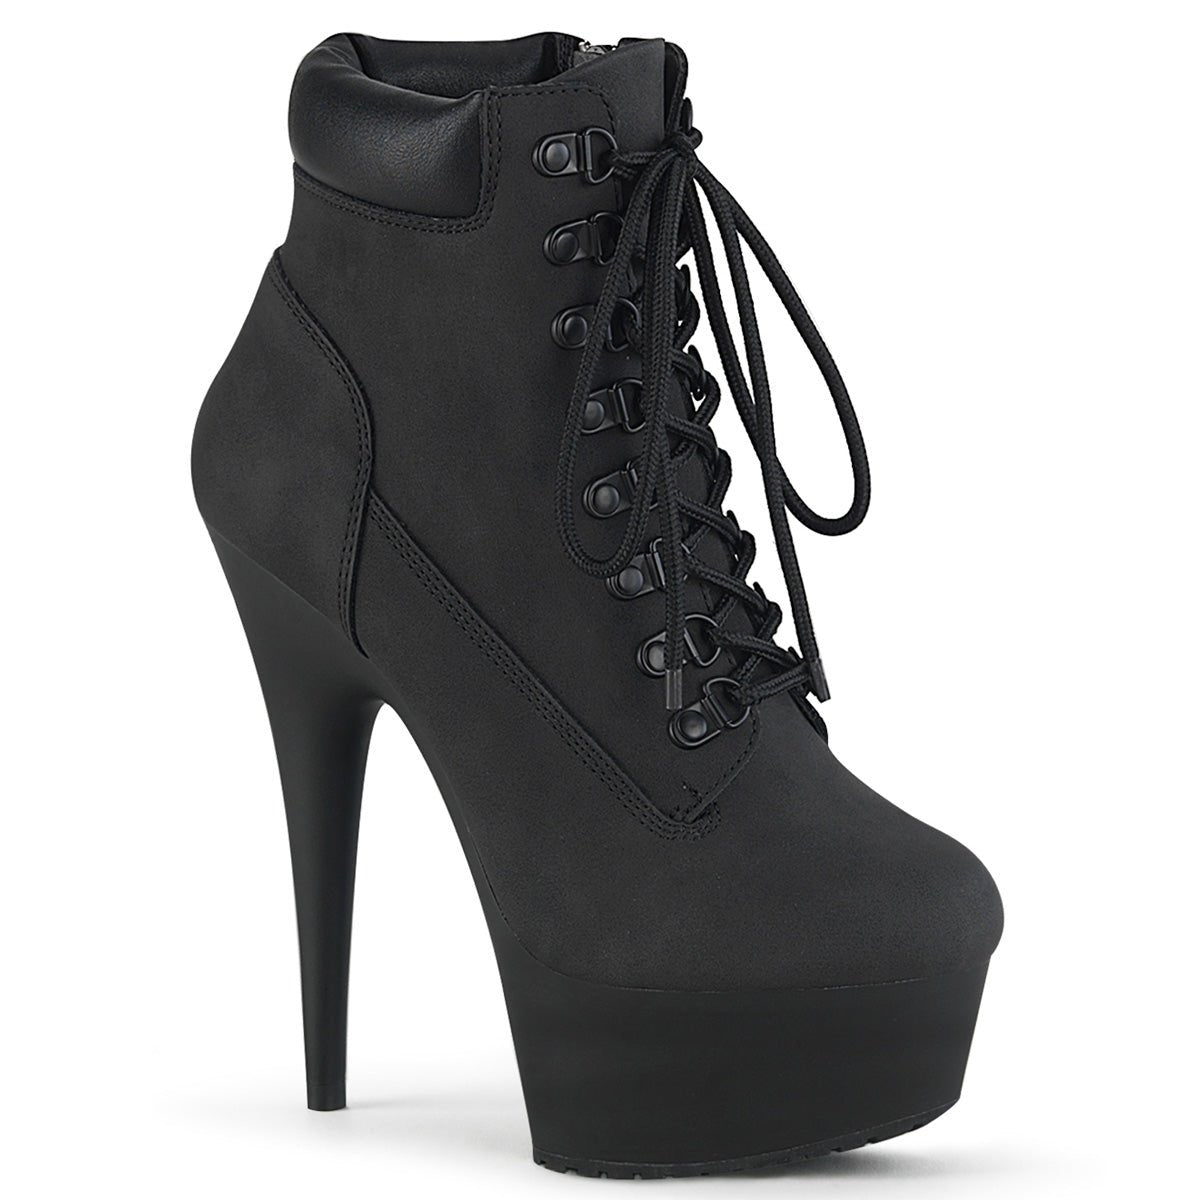 Pleaser DELIGHT 600TL 02 Platform Boots,Front Lace Boots - From Pleaser Sold By Alternative Footwear